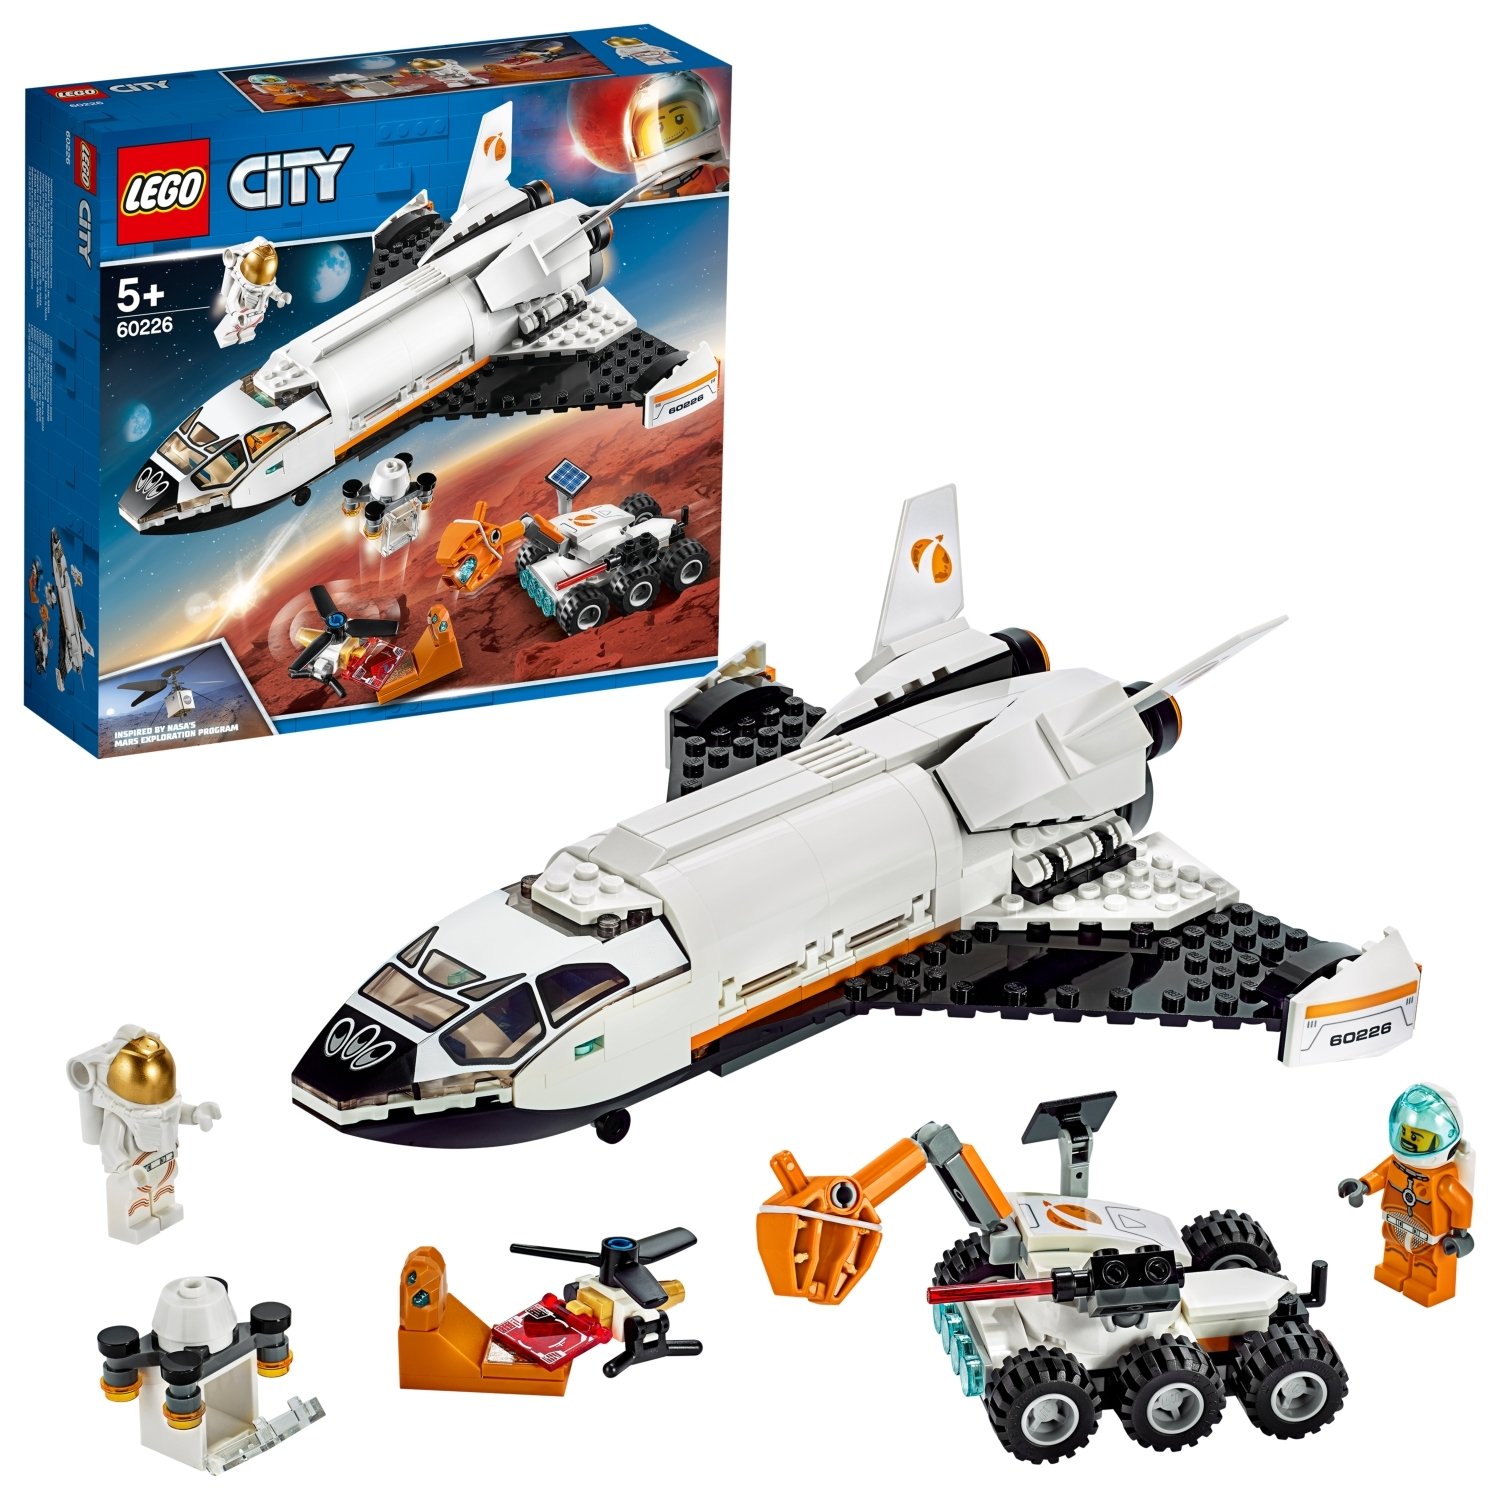 LEGO City Mars Research Shuttle Playset - 60226